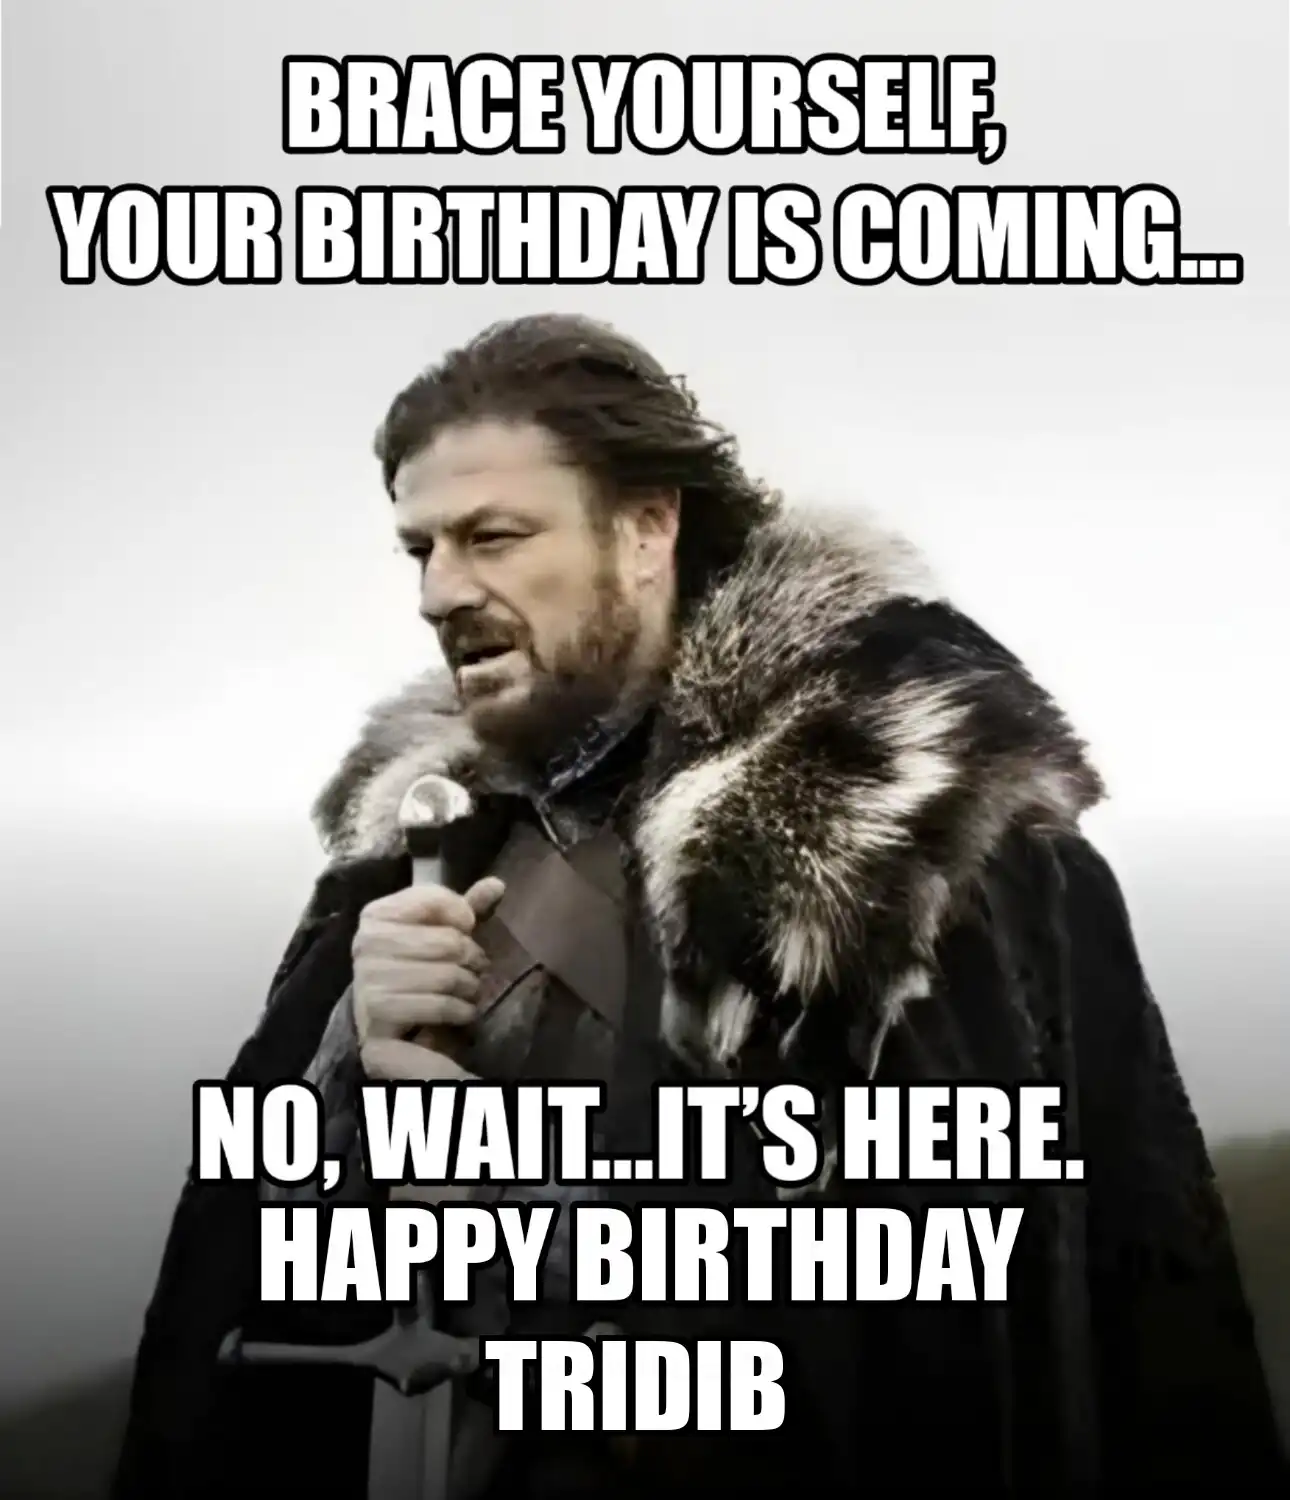 Happy Birthday Tridib Brace Yourself Your Birthday Is Coming Meme